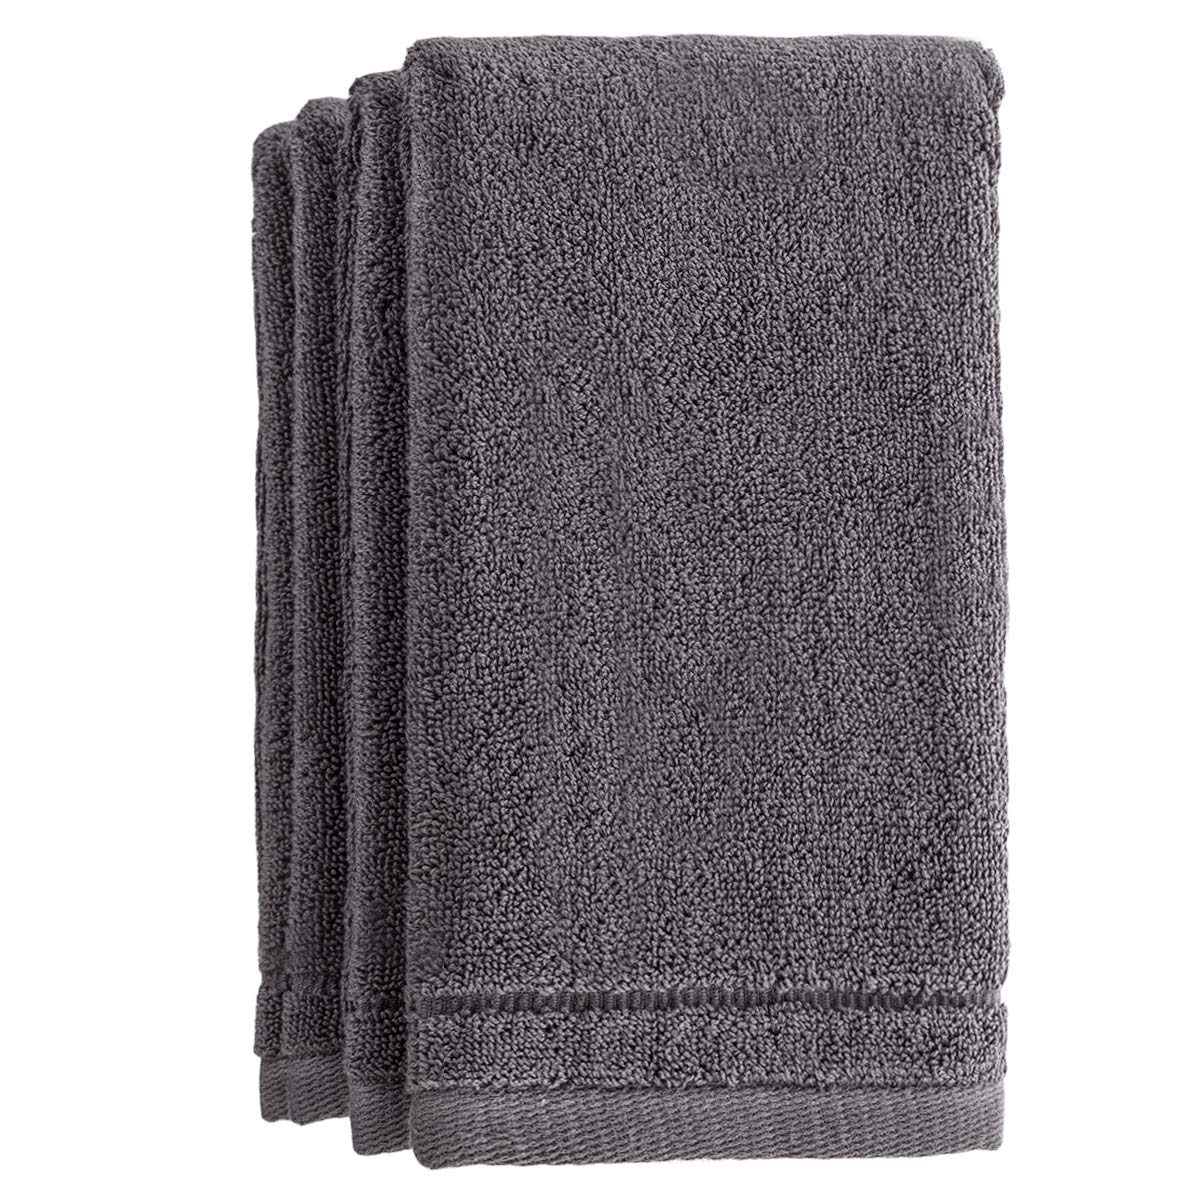 Creative Scents Cotton Fingertip Towels Set - 4 Pack - 11 x 18 Inches Decorative Small Extra-Absorbent and Soft Terry Towel for Bathroom - Powder Room, Guest and Housewarming Gift (Grey)  - Like New